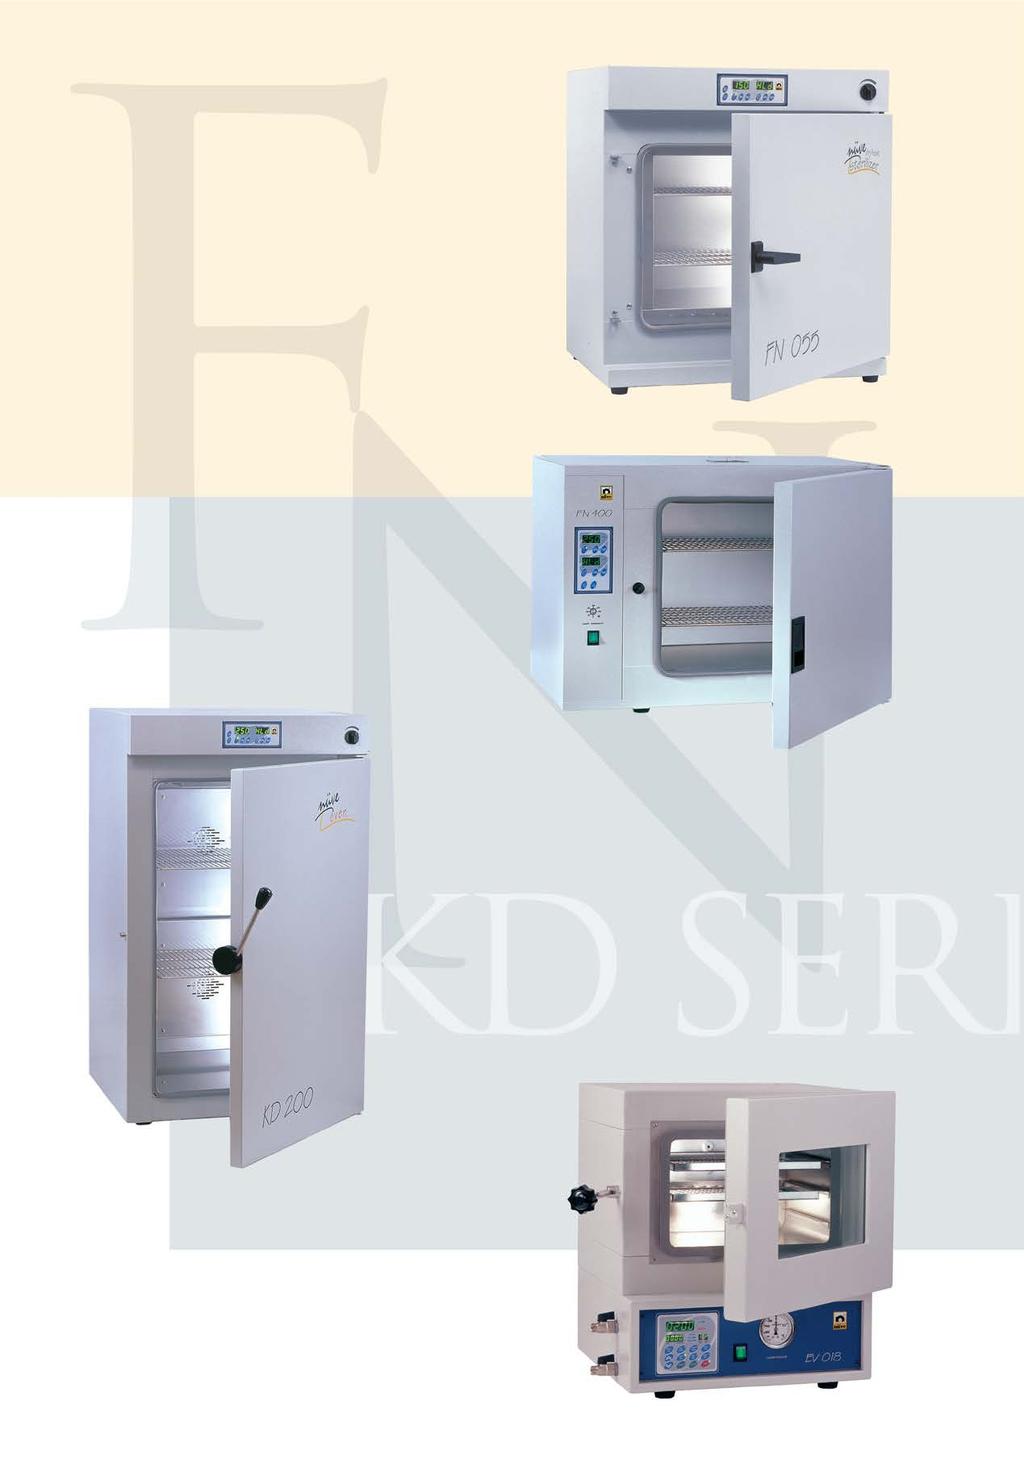 FN 032/055/120 DRY HEAT STERILIZERS / OVENS Three different sizes: 32, 55 and 120 liters. Temperature range: Ambient Temperature +5 C / 250 C. Designed for sterilization, drying and heating purposes.